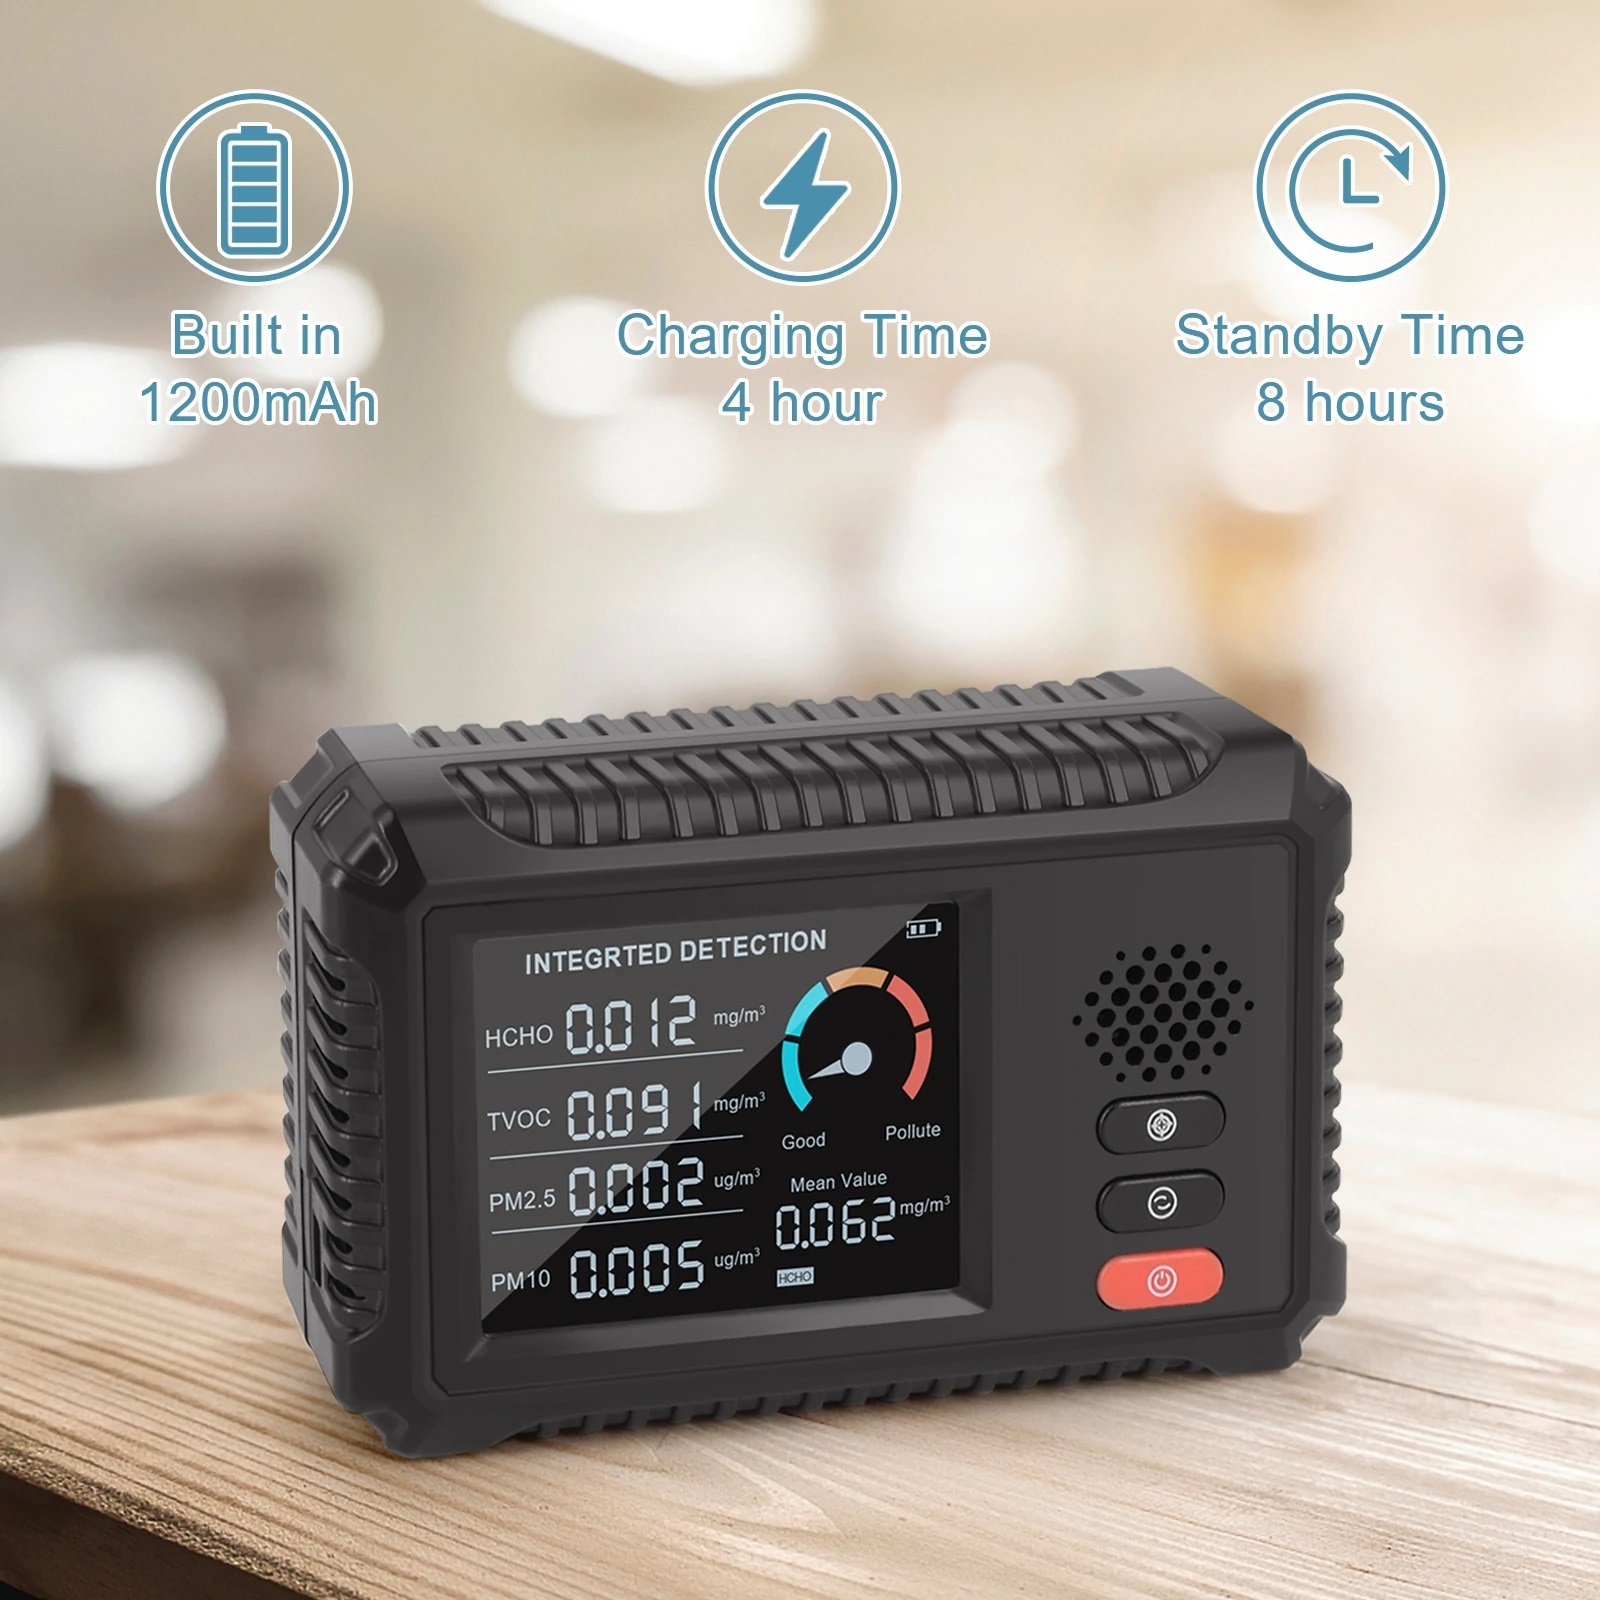 HCHOTVOCPM25PM10-Tester-Formaldehyde-Detector-Real-Time-Data-Monitoring-Multifunctional-Air-Quality--1892301-6